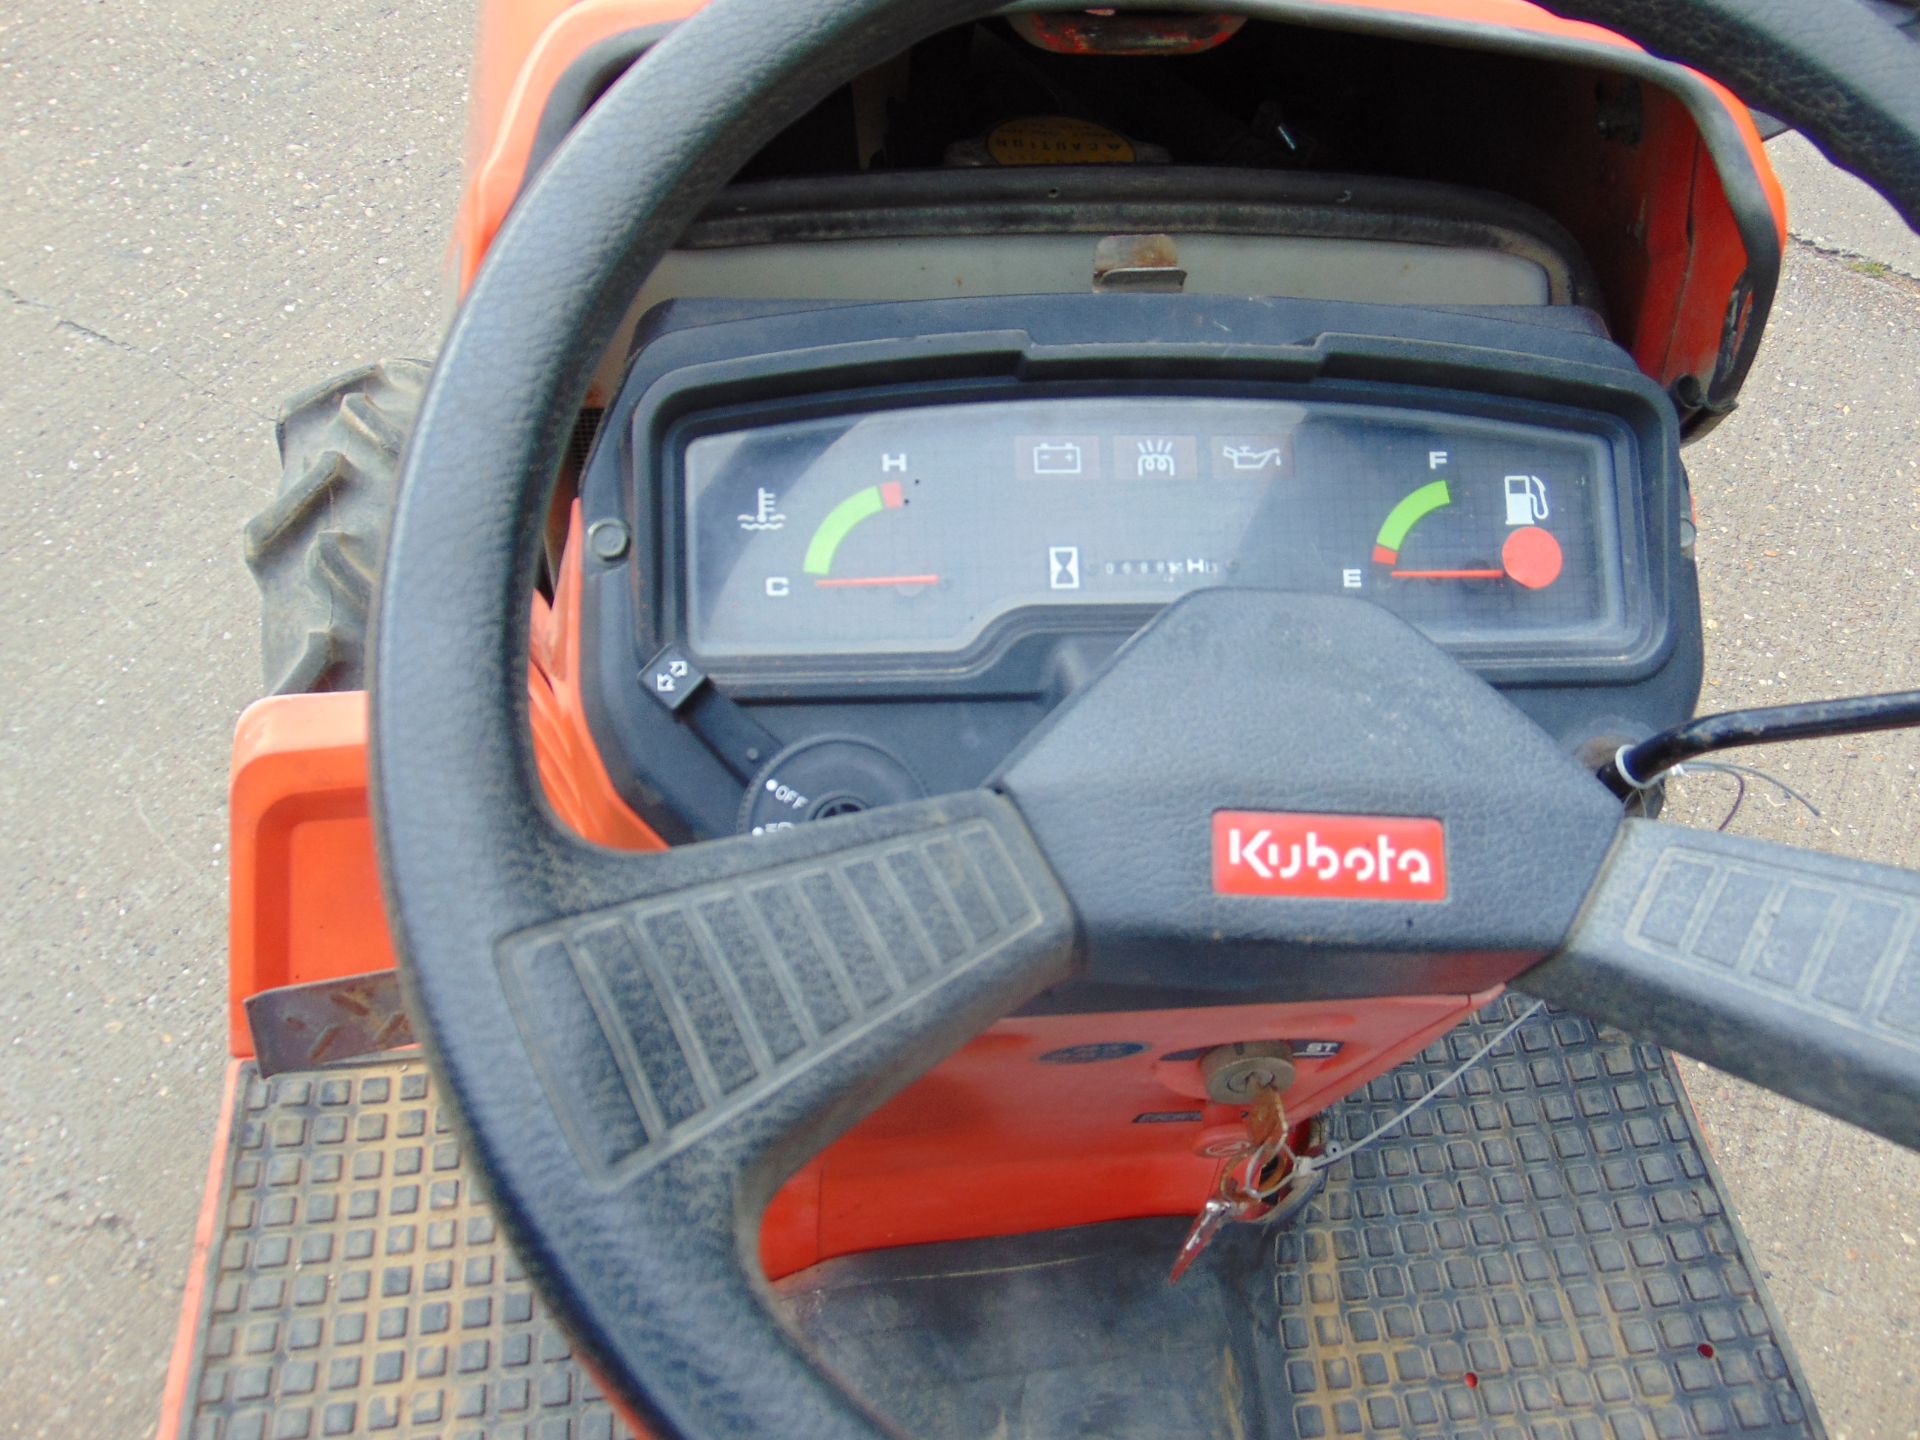 Kubota A13 Compact Tractor w/ Rotary Tiller - Image 11 of 23